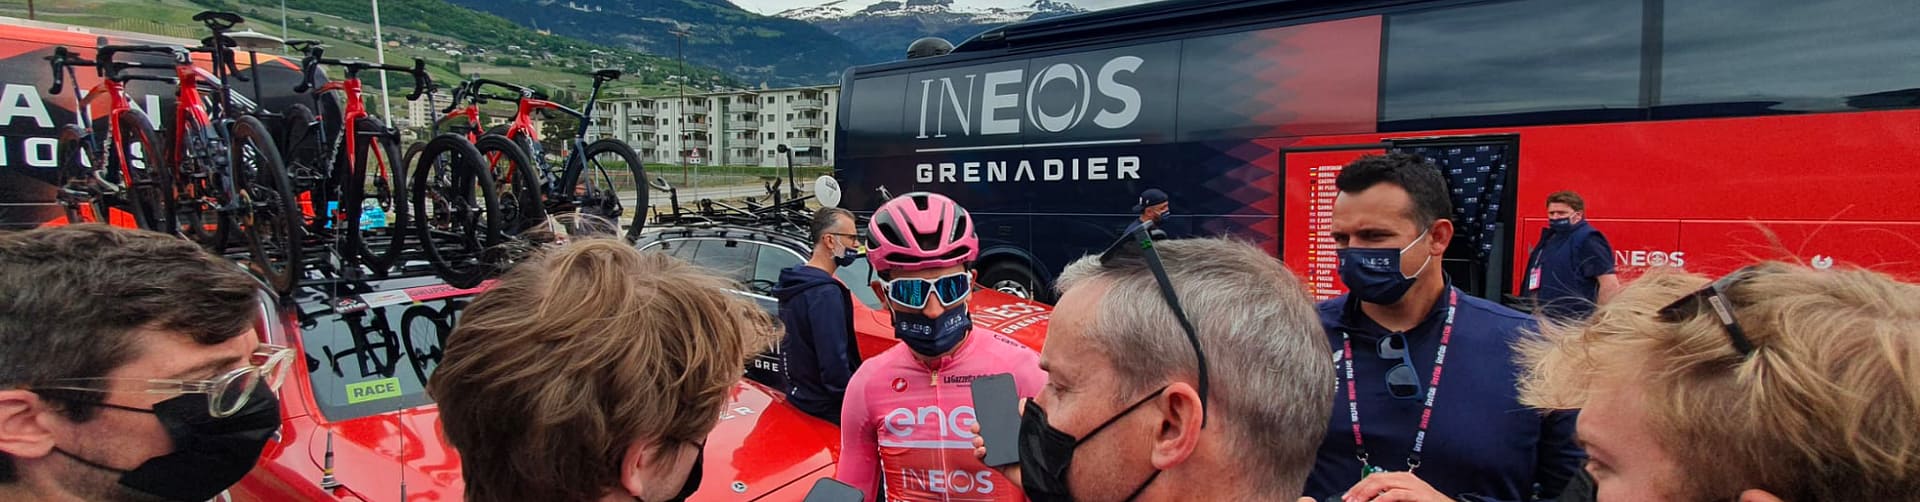 Behind the scenes at the Giro d’Italia with SunGod and Ineos Grenadiers